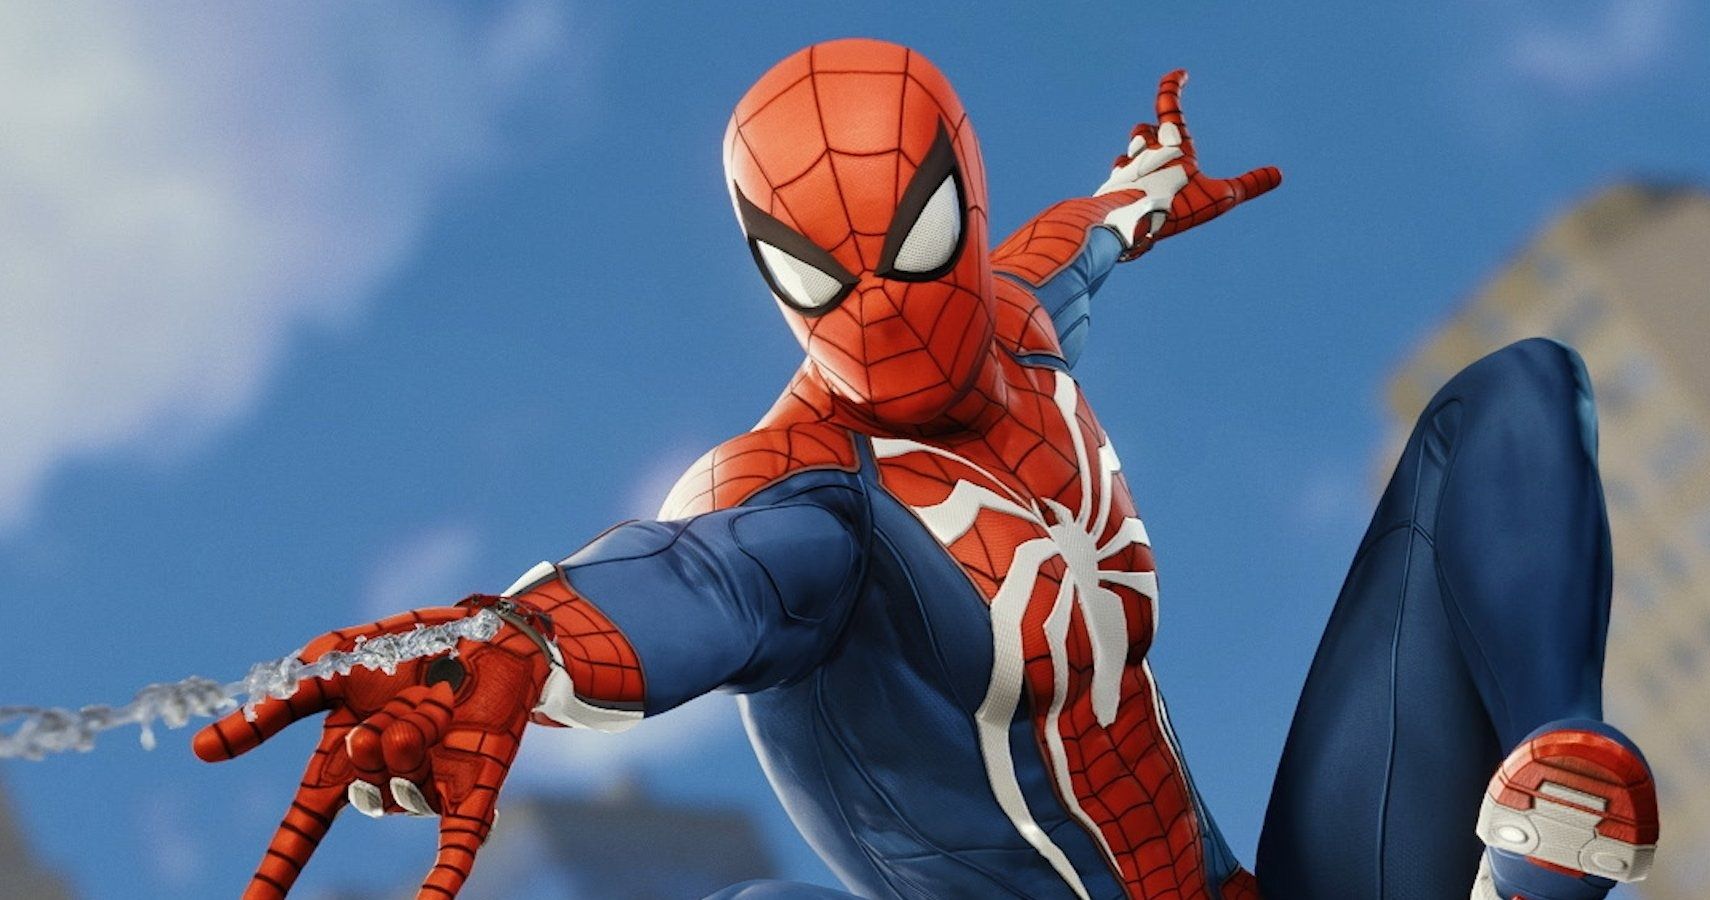 PS4's 'Spider-Man' Just Broke God of War's Sales Record With 3.3 Million  Copies Sold In 3 Days